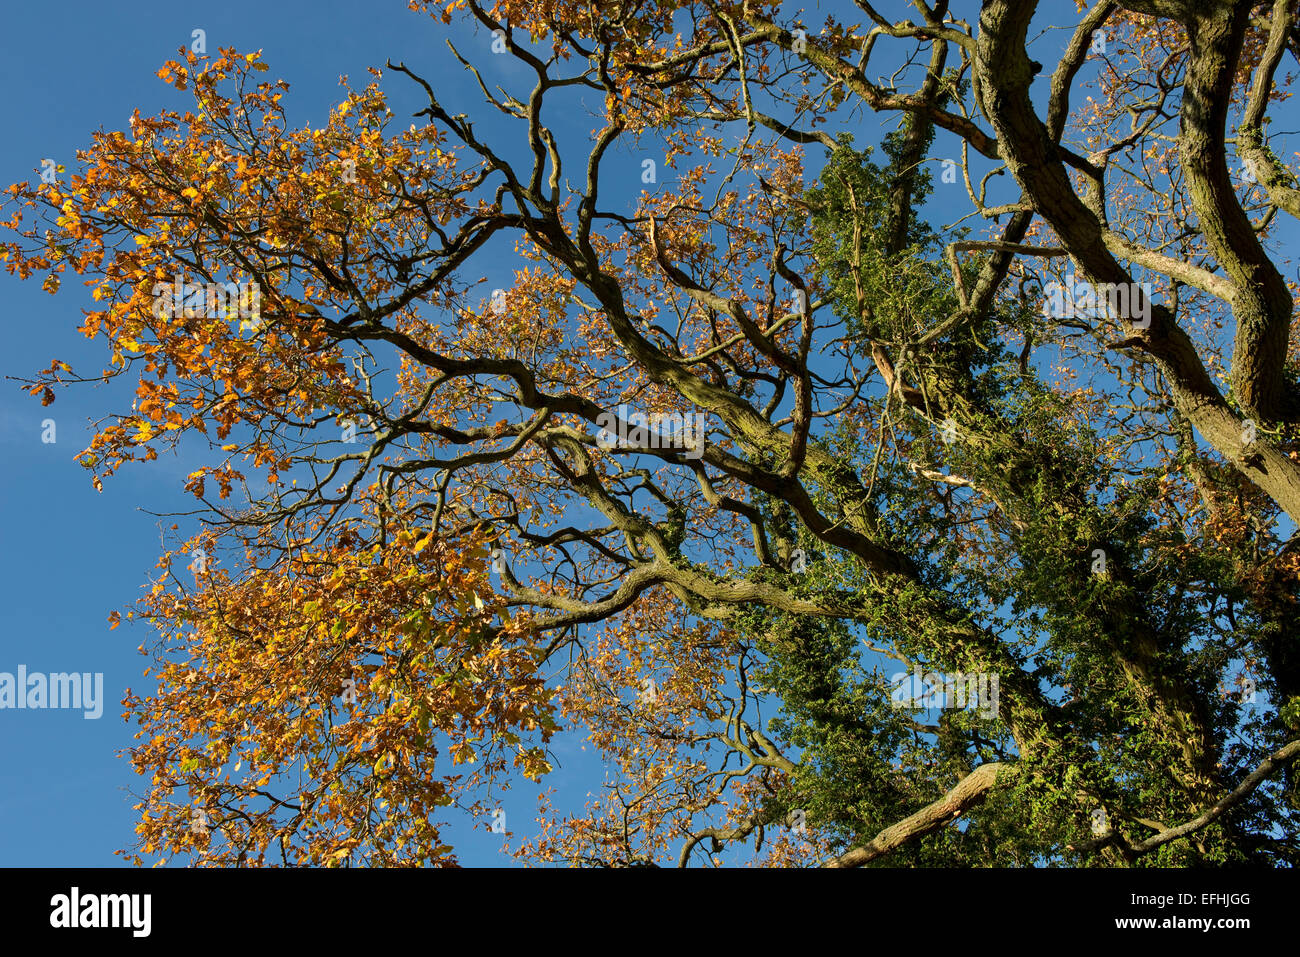 An oak tree clad in ivy and leaves in autumn colours on a fine day with blue sky, Berkshire, England, UK, November Stock Photo